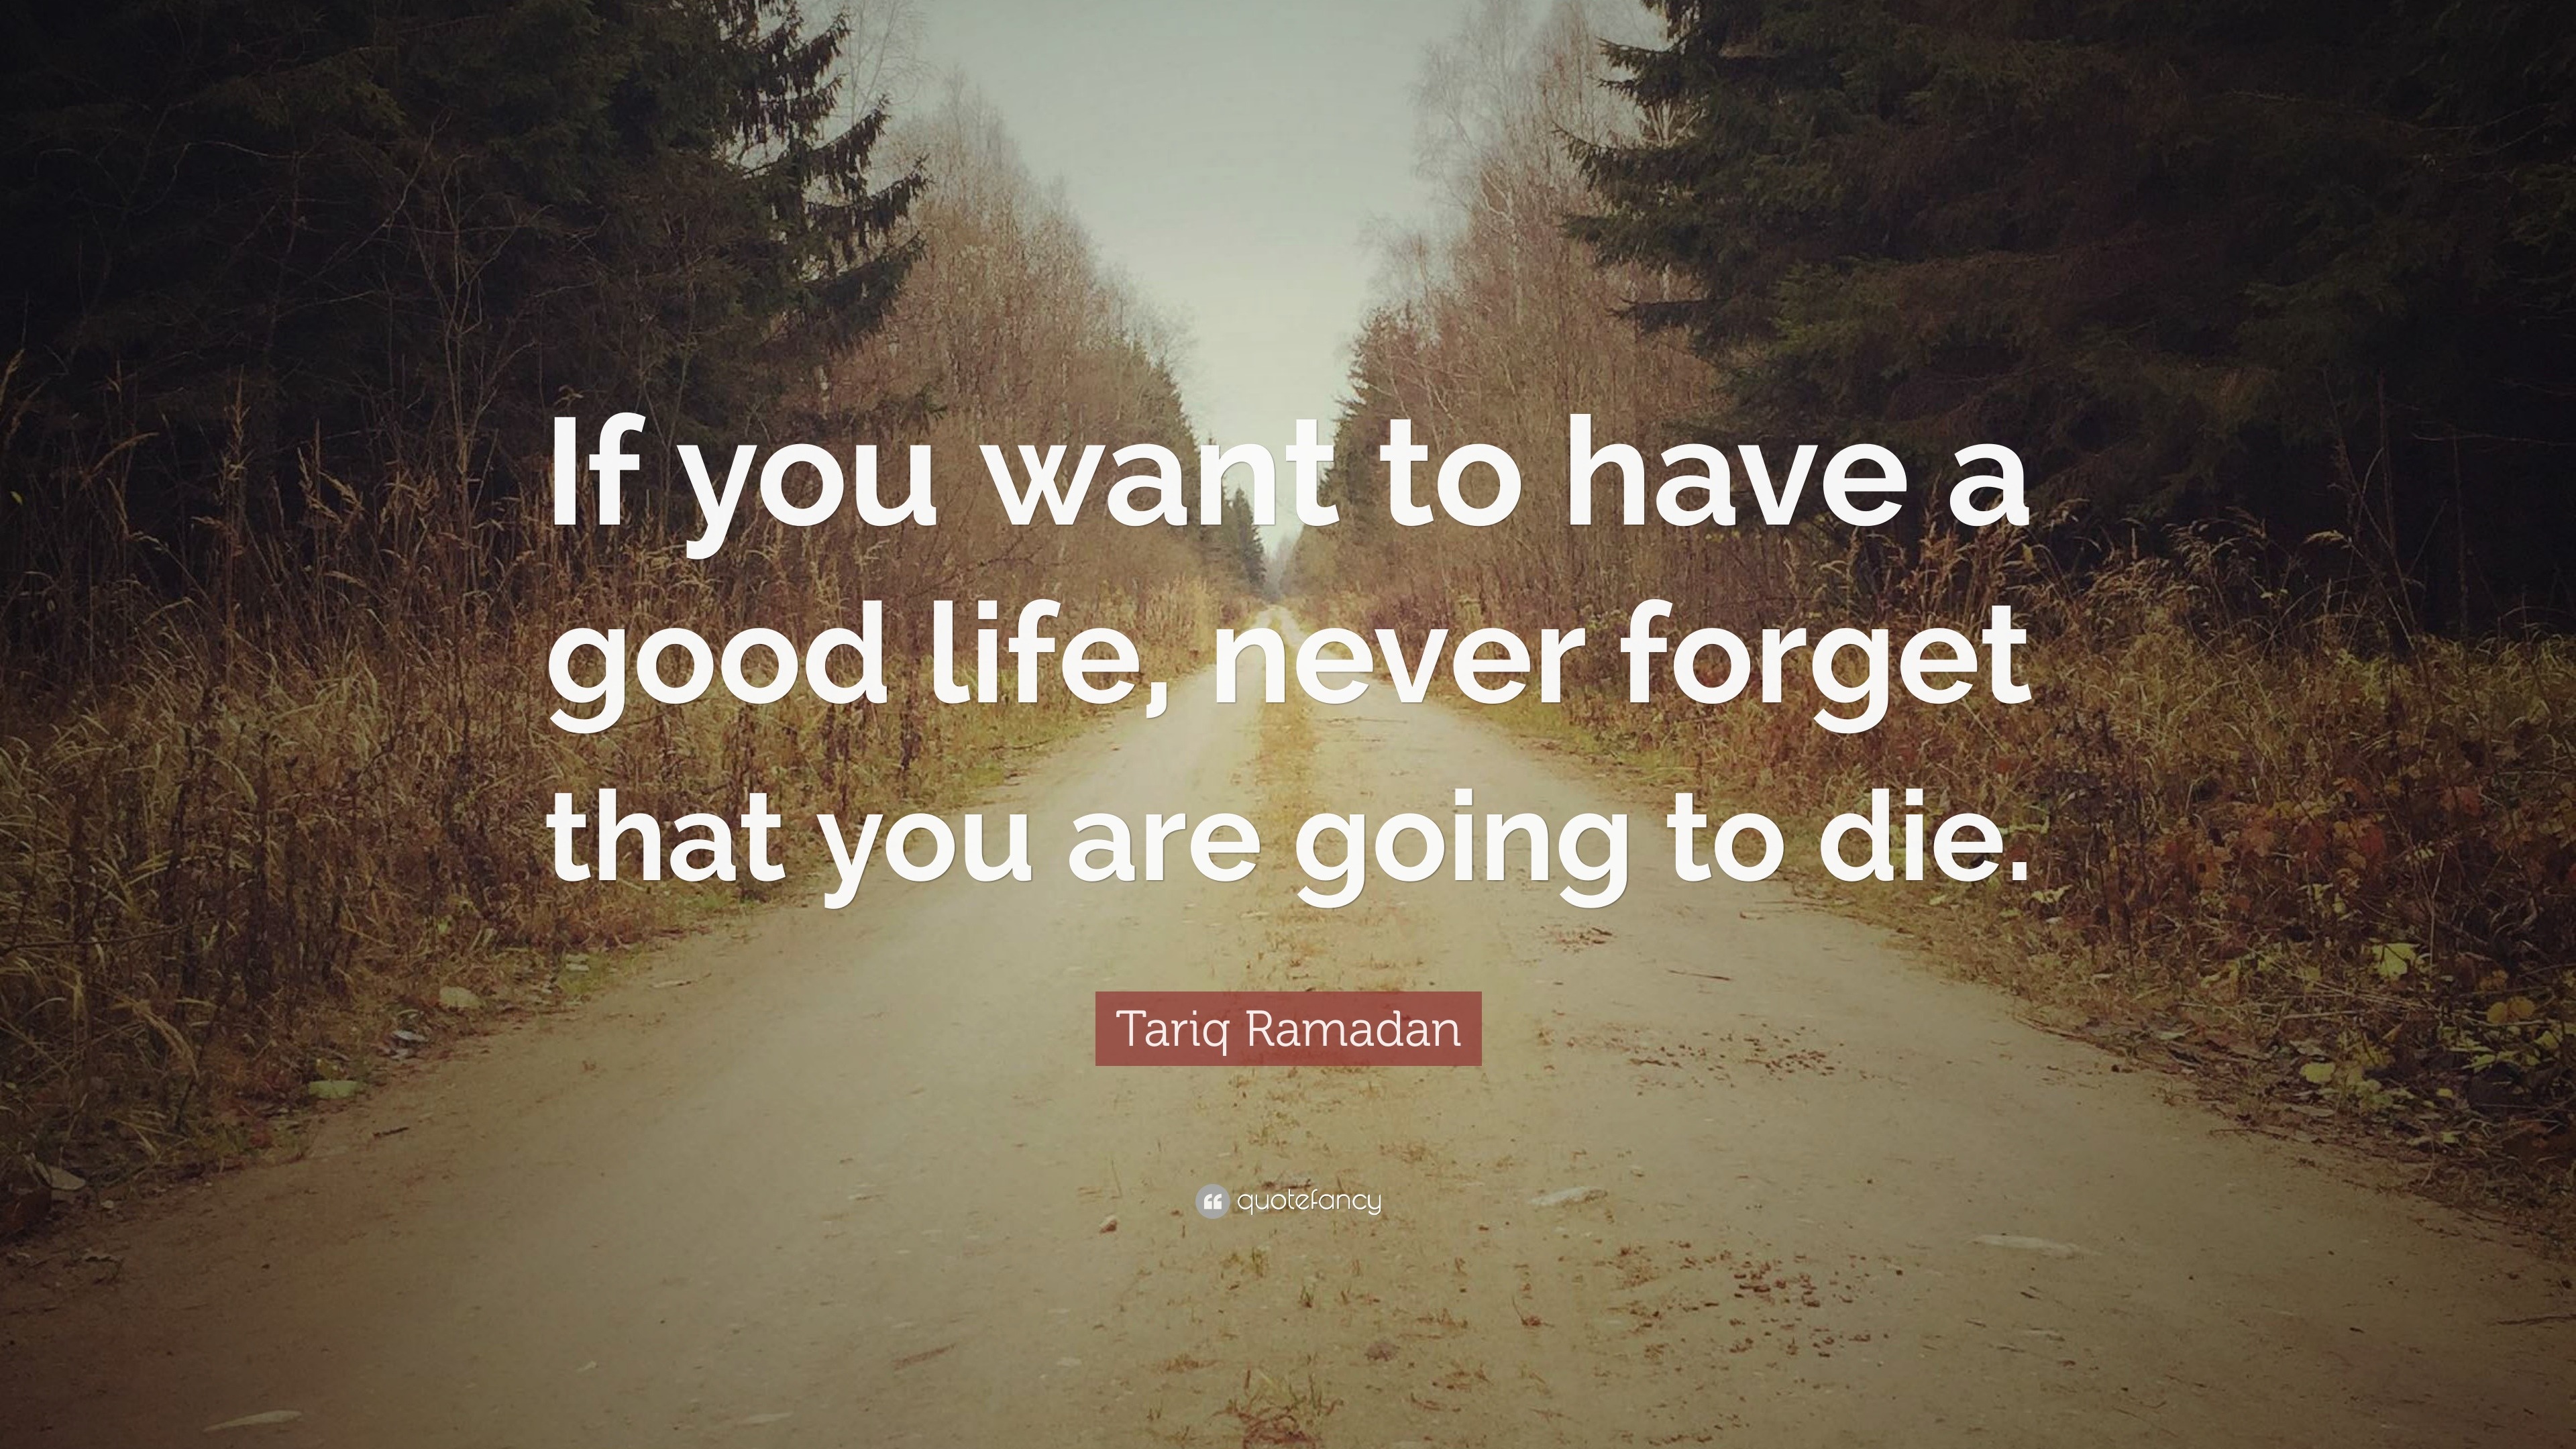 Tariq Ramadan Quote “If you want to have a good life never for